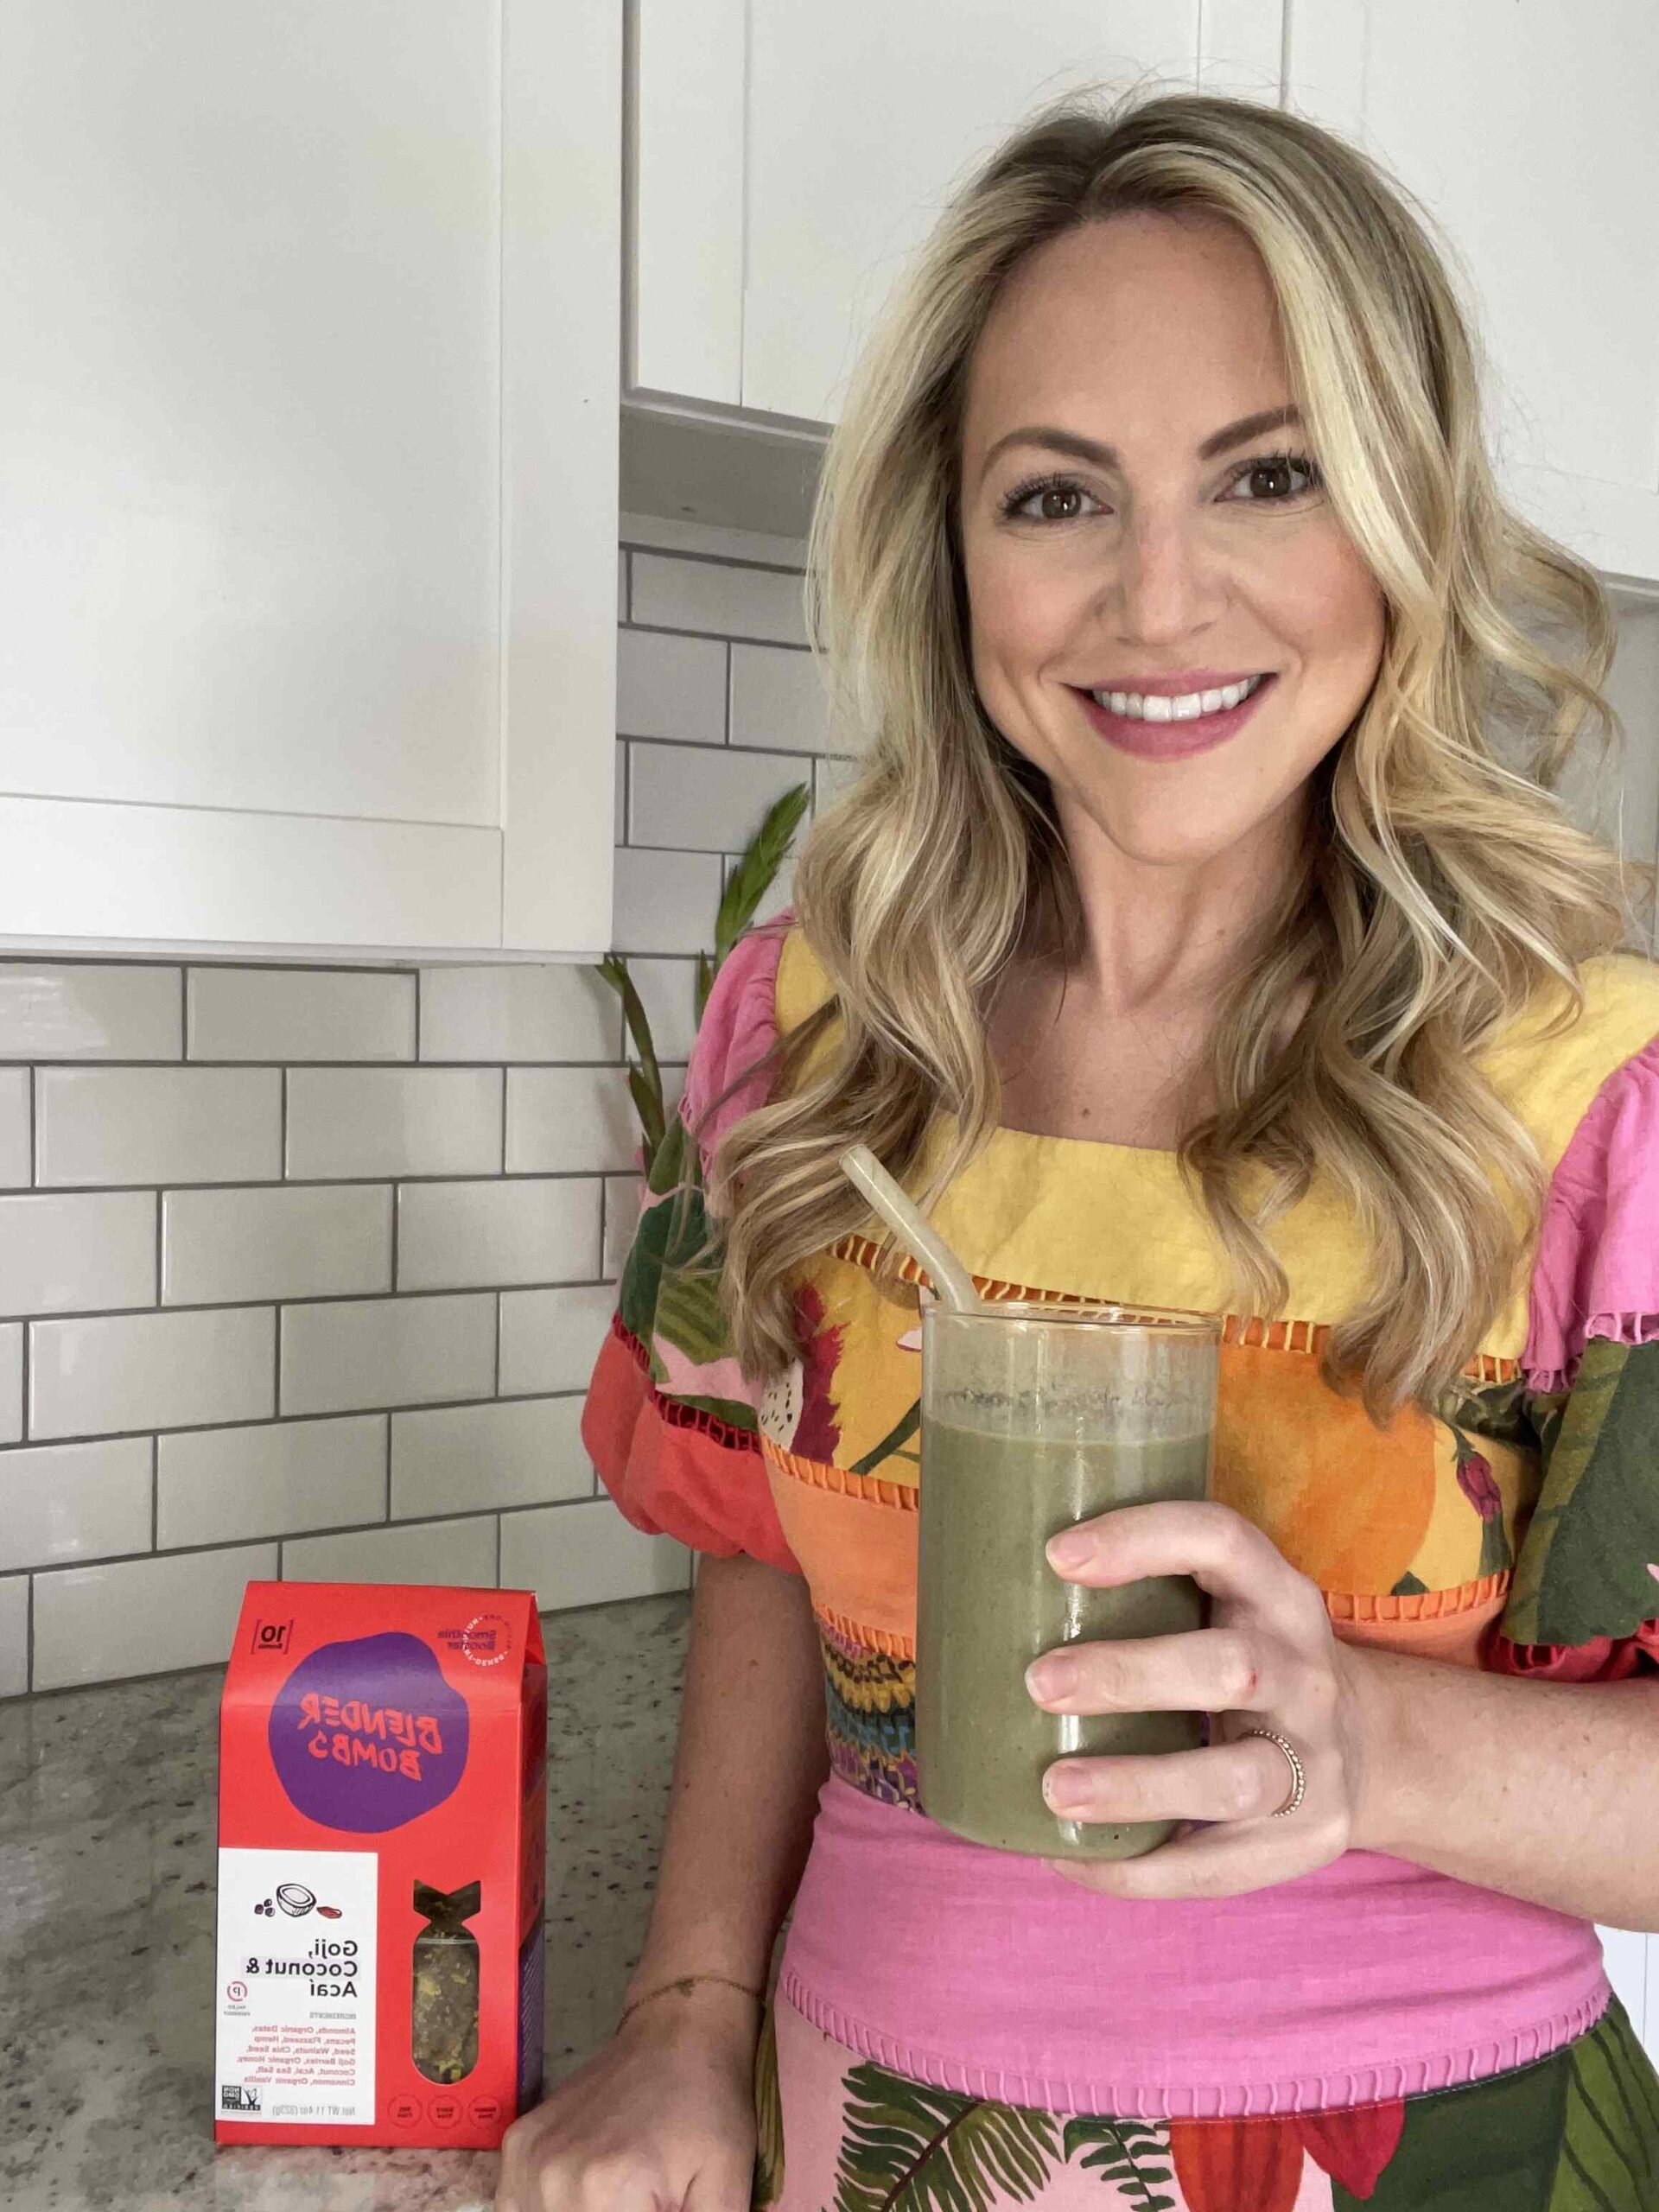 Blonde dietitian smiling holding a smoothie